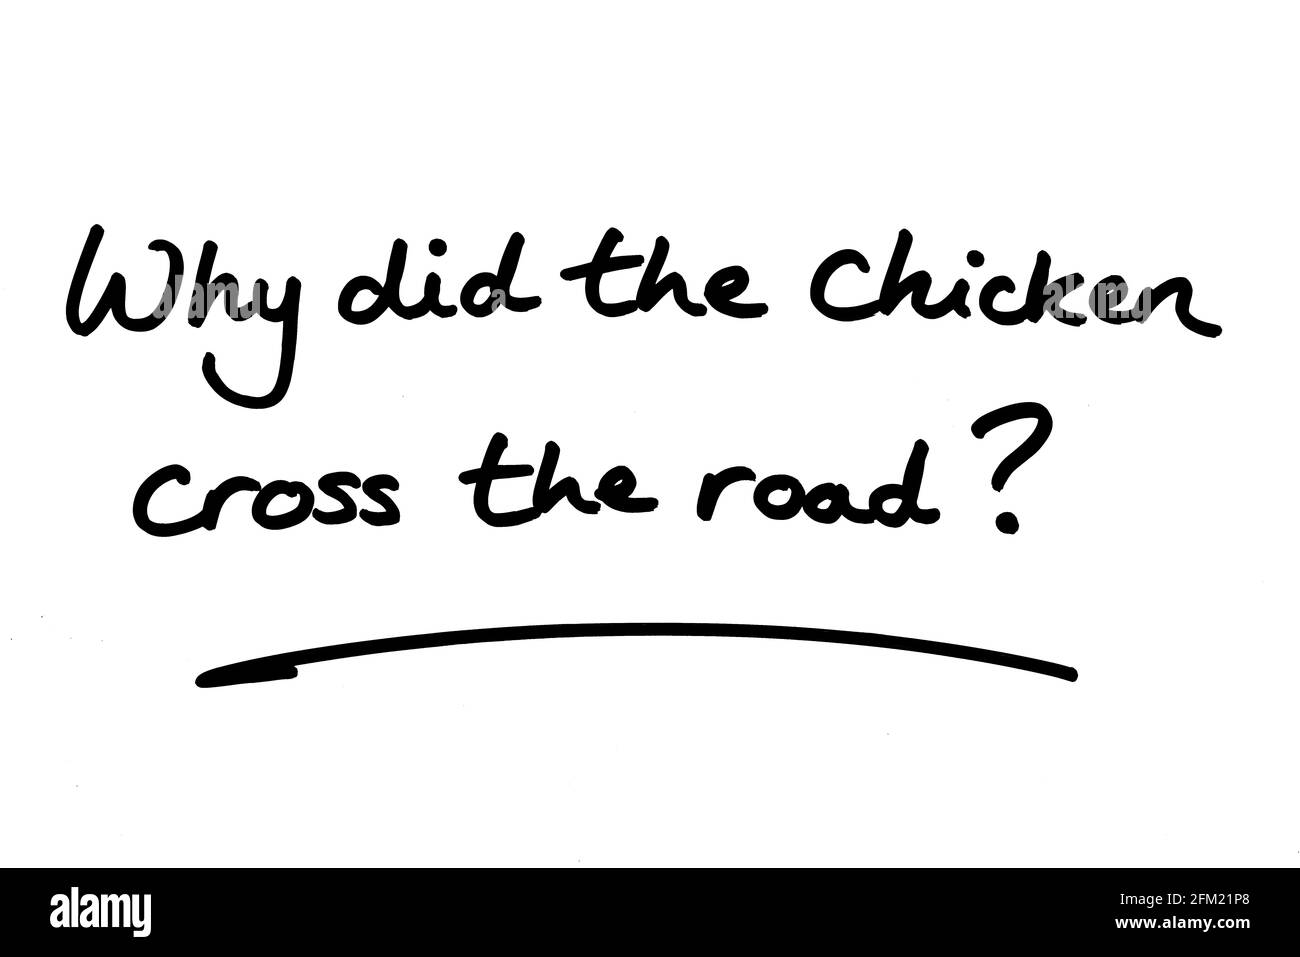 Why did the chicken cross the road? handwritten on a white background. Stock Photo